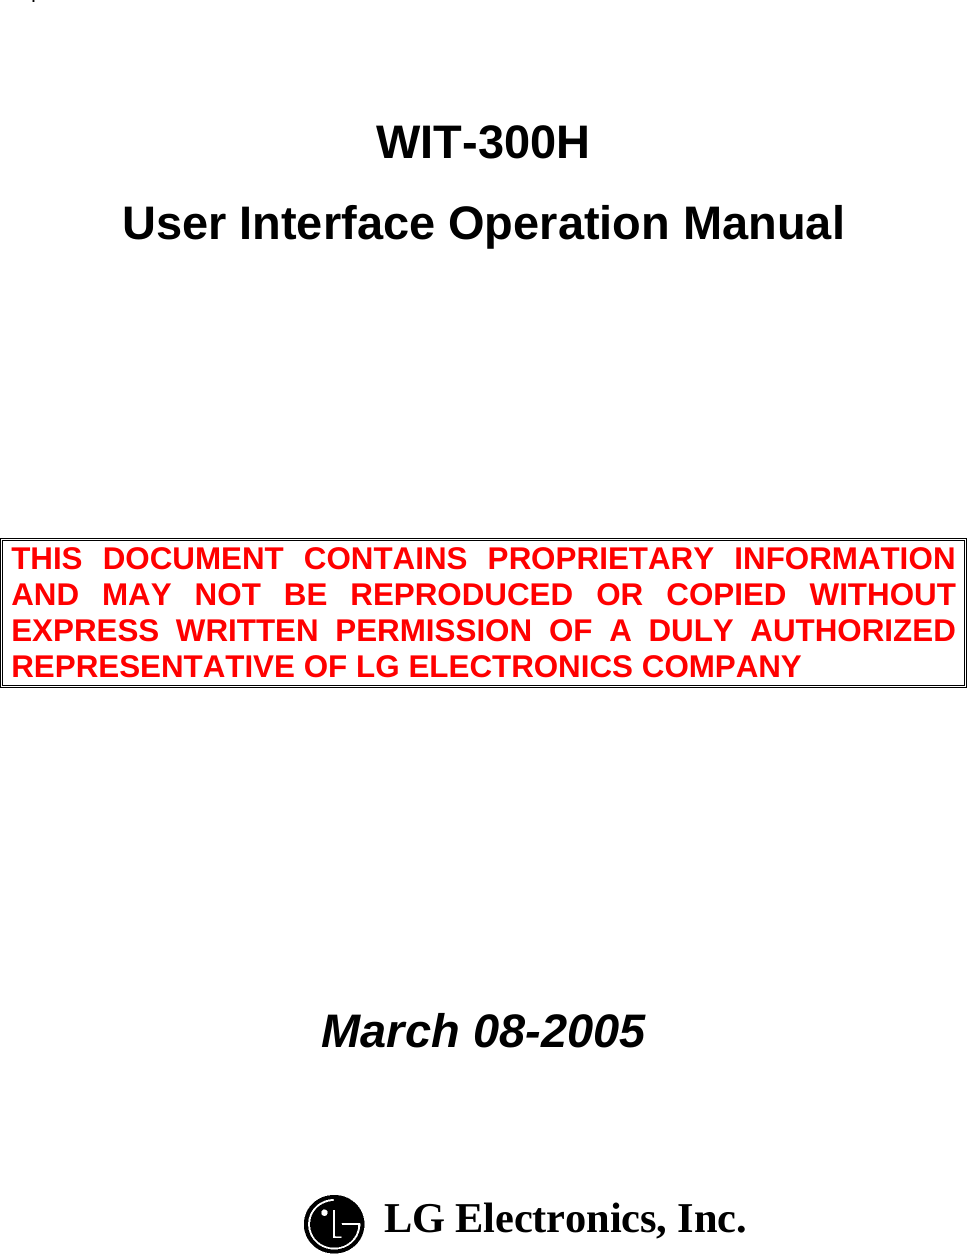 .     WIT-300H User Interface Operation Manual      THIS DOCUMENT CONTAINS PROPRIETARY INFORMATION AND MAY NOT BE REPRODUCED OR COPIED WITHOUT EXPRESS WRITTEN PERMISSION OF A DULY AUTHORIZED REPRESENTATIVE OF LG ELECTRONICS COMPANY        March 08-2005    LG Electronics, Inc.     